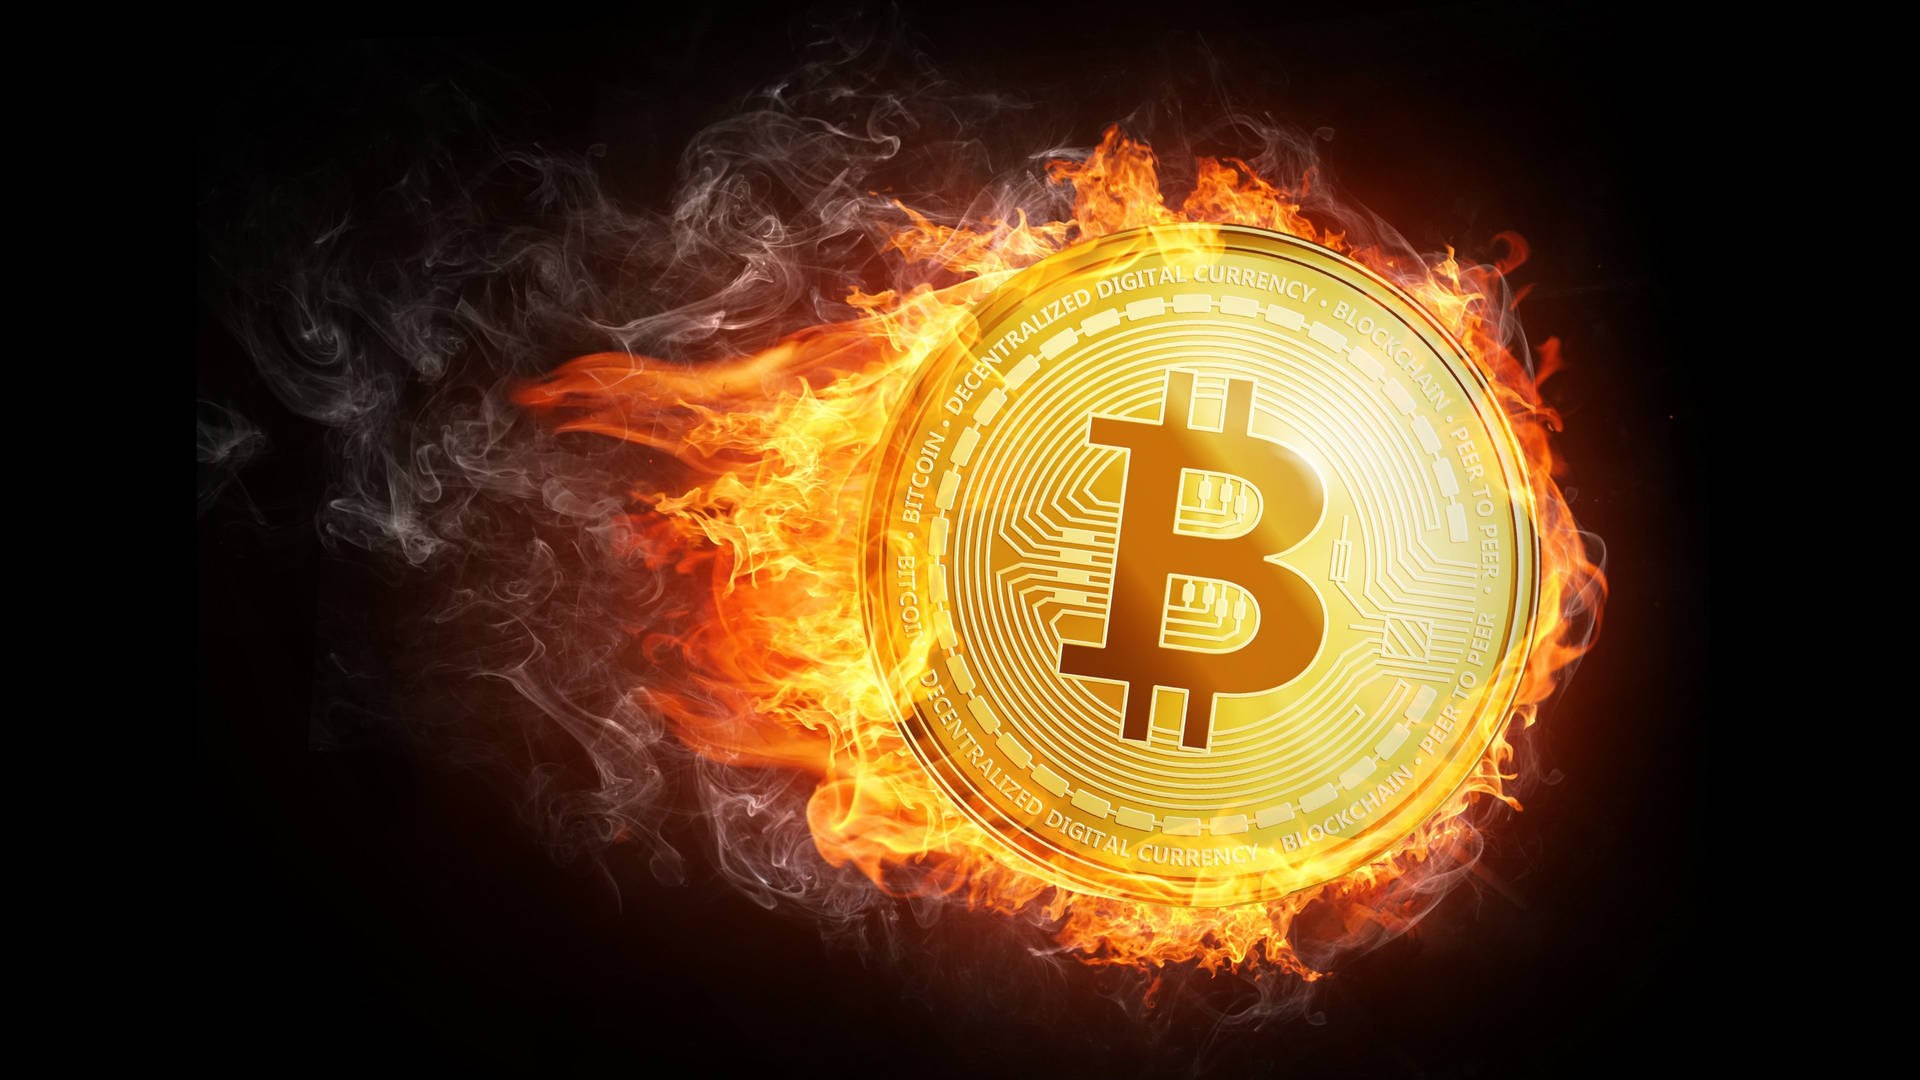 Bitcoin Price Prediction: BTC Pumps 3% After Michael Saylor Boosts Bitcoin Holdings By $593 Million, But Time Is Running Out To Buy This Coin Primed To Explode On Bitcoin ETF Approvals